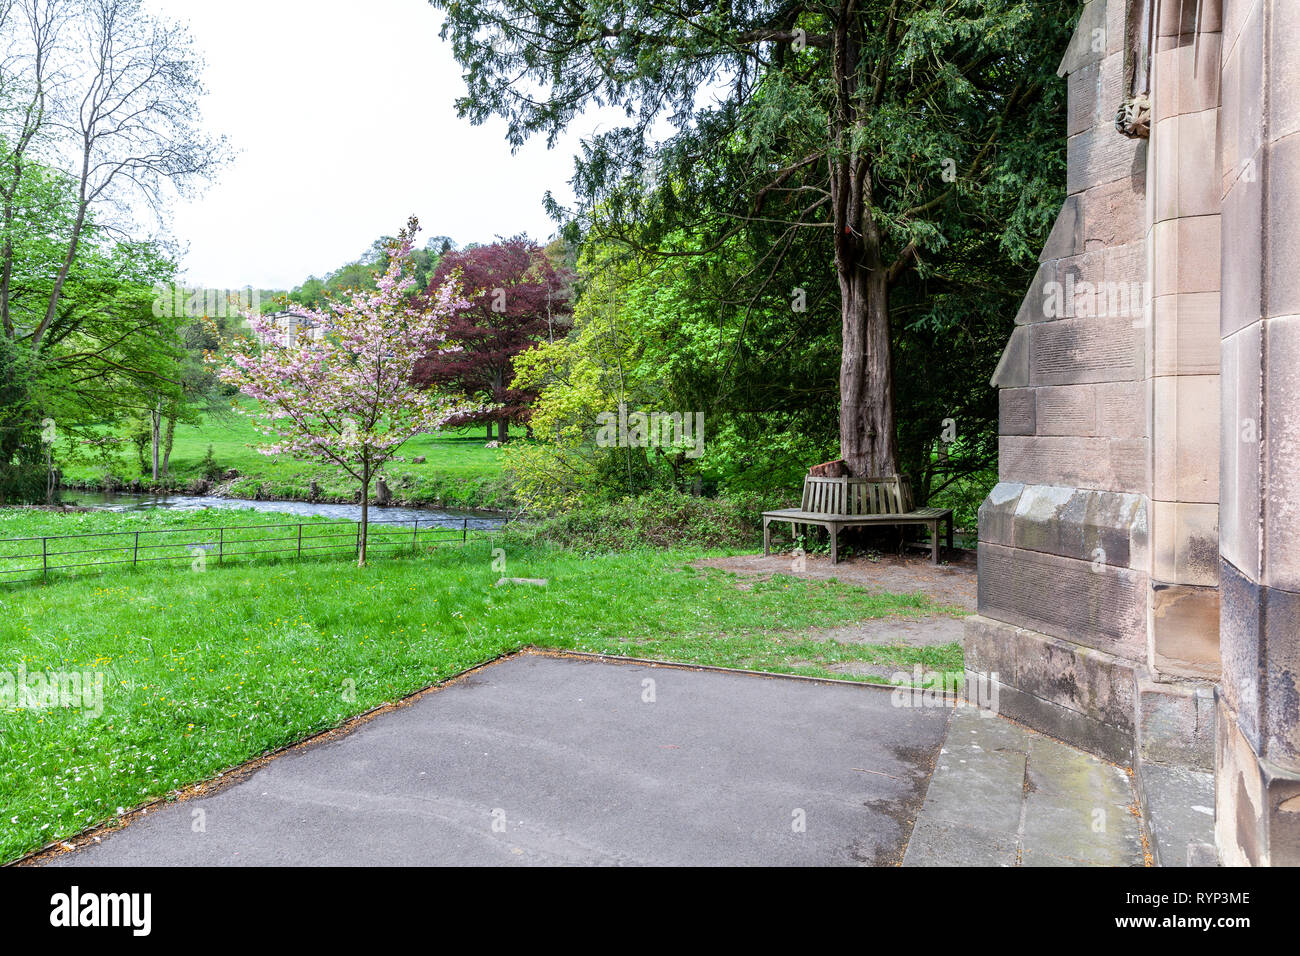 Wooden bench under an old tree in a church yard, in Cromford, Derbyshire, Stock Photo